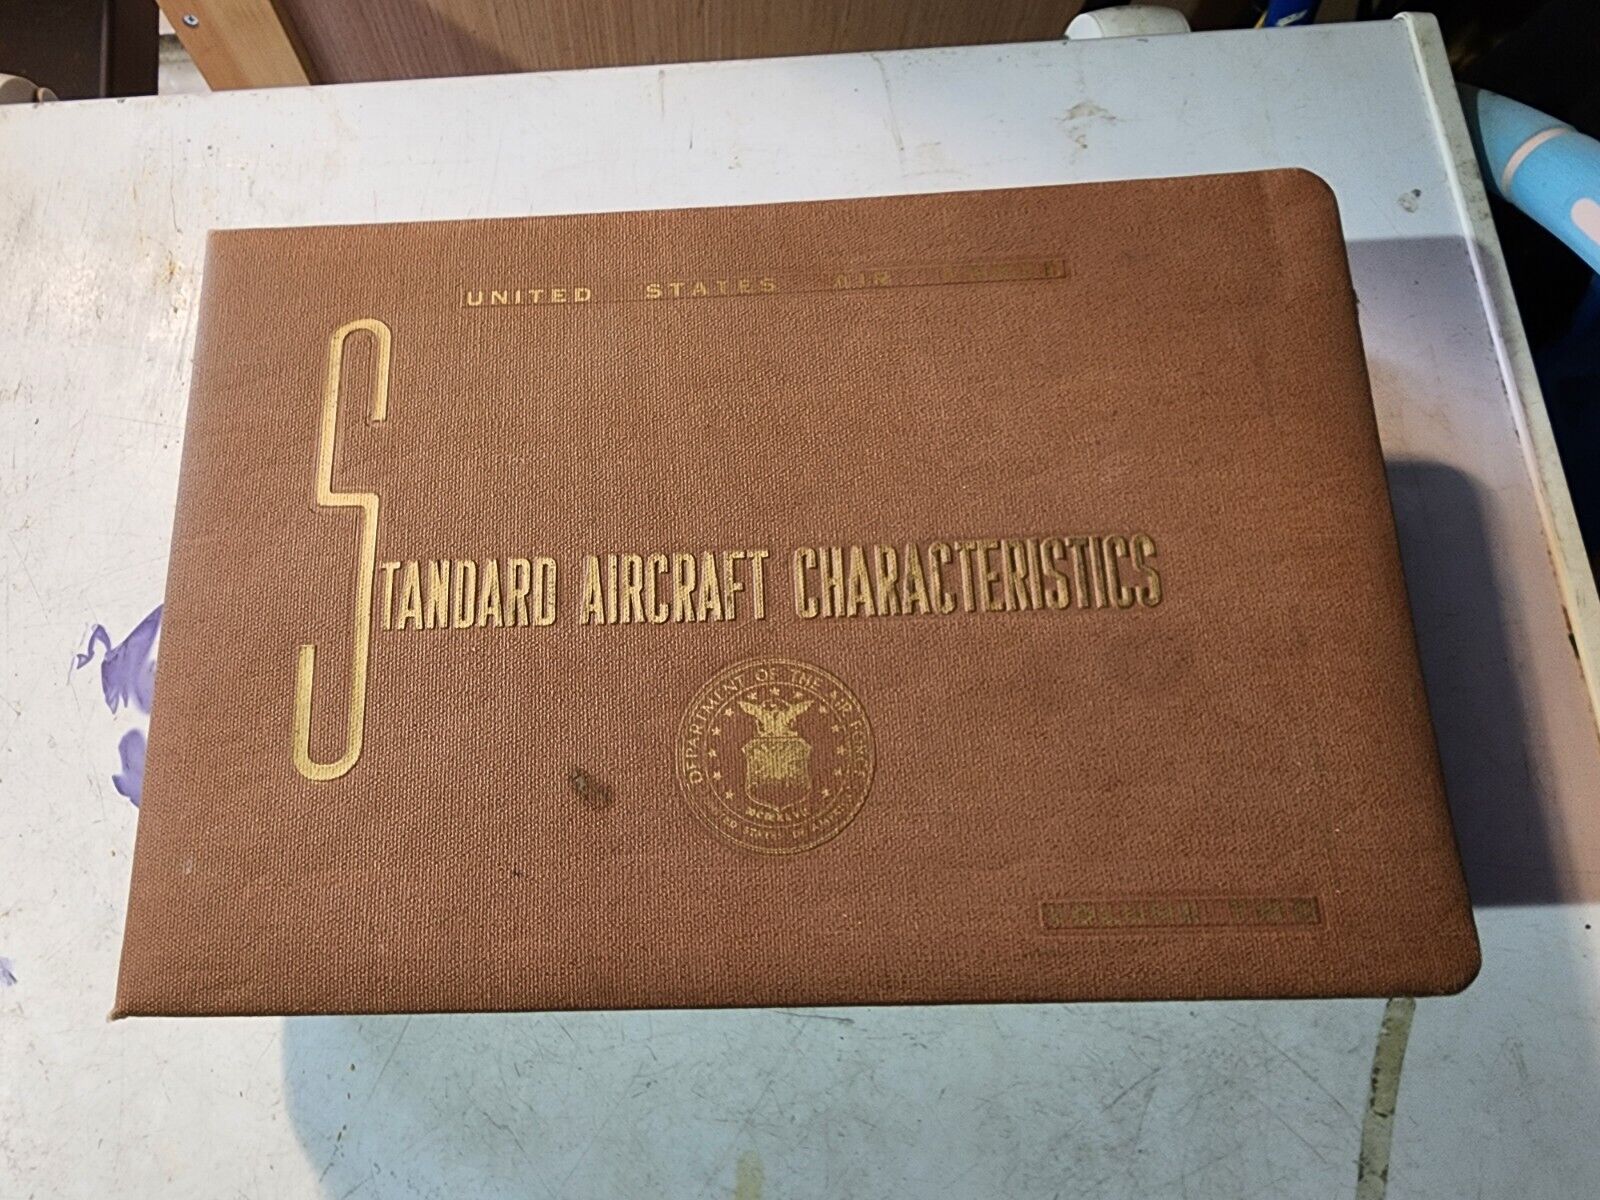 United States Airforce, Standard Aircraft Characteristics. Rare, Military Book